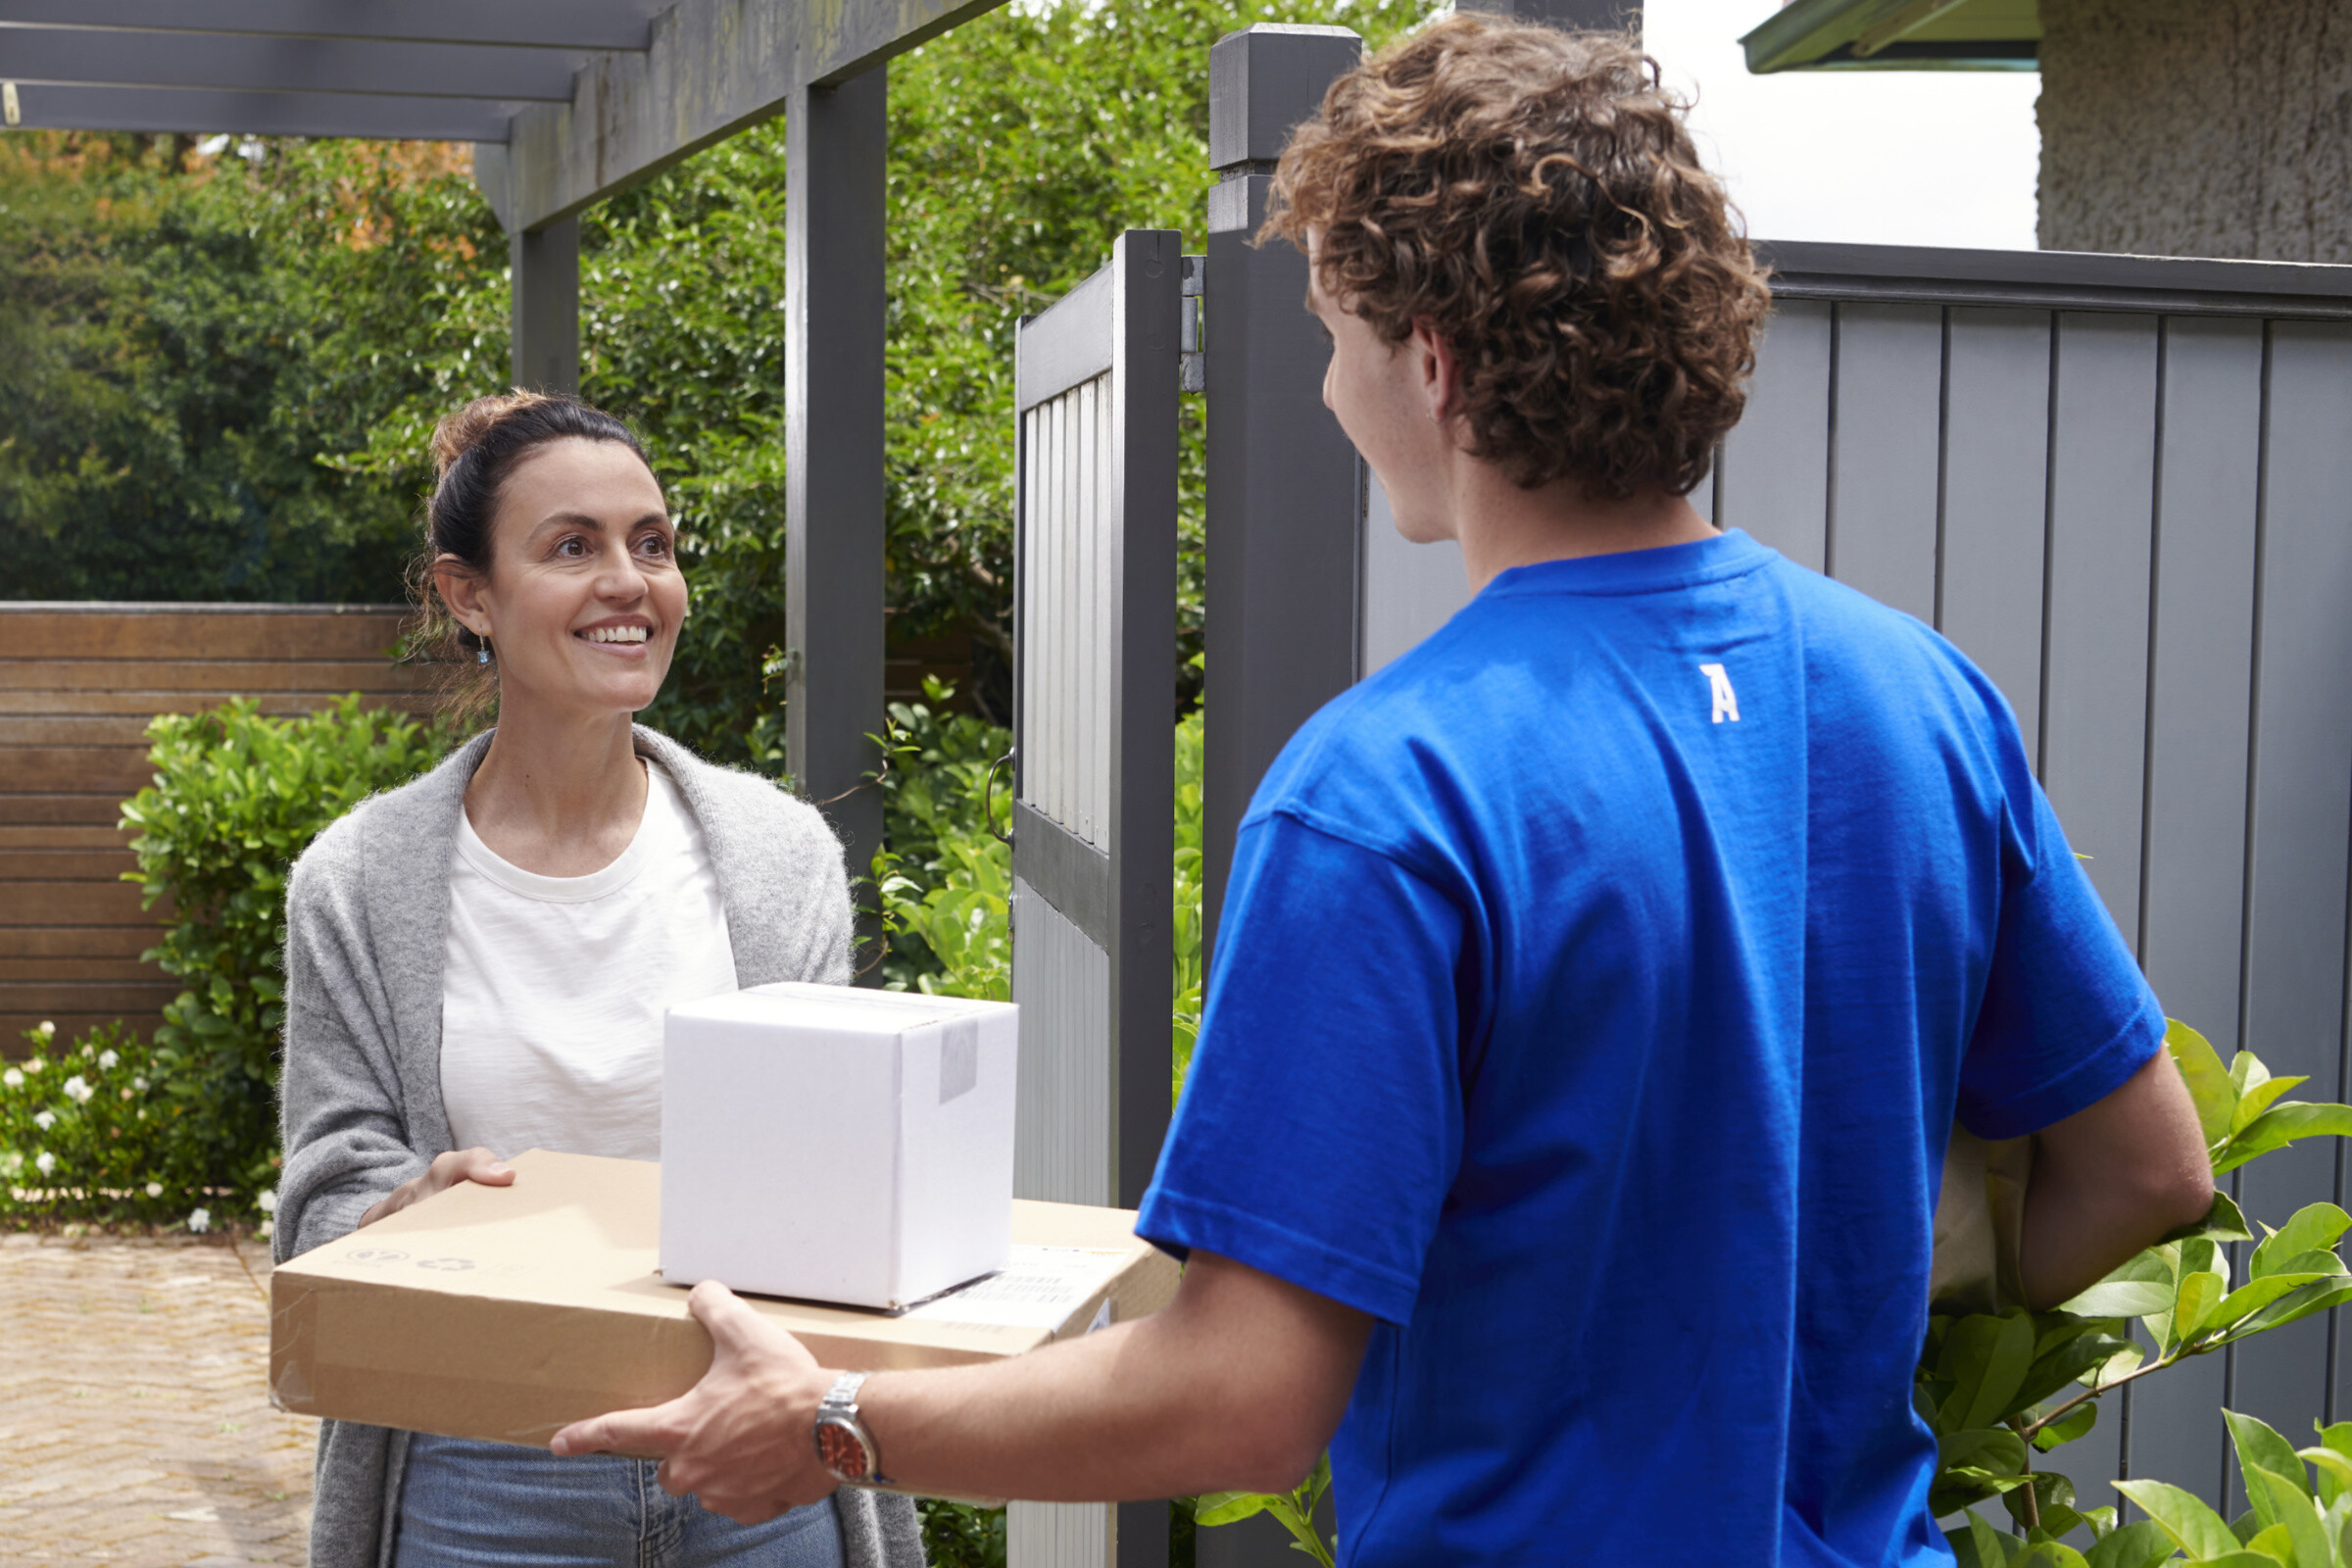 A delivery person handing a package to a receipient, walking towards a house with a smile on their face.